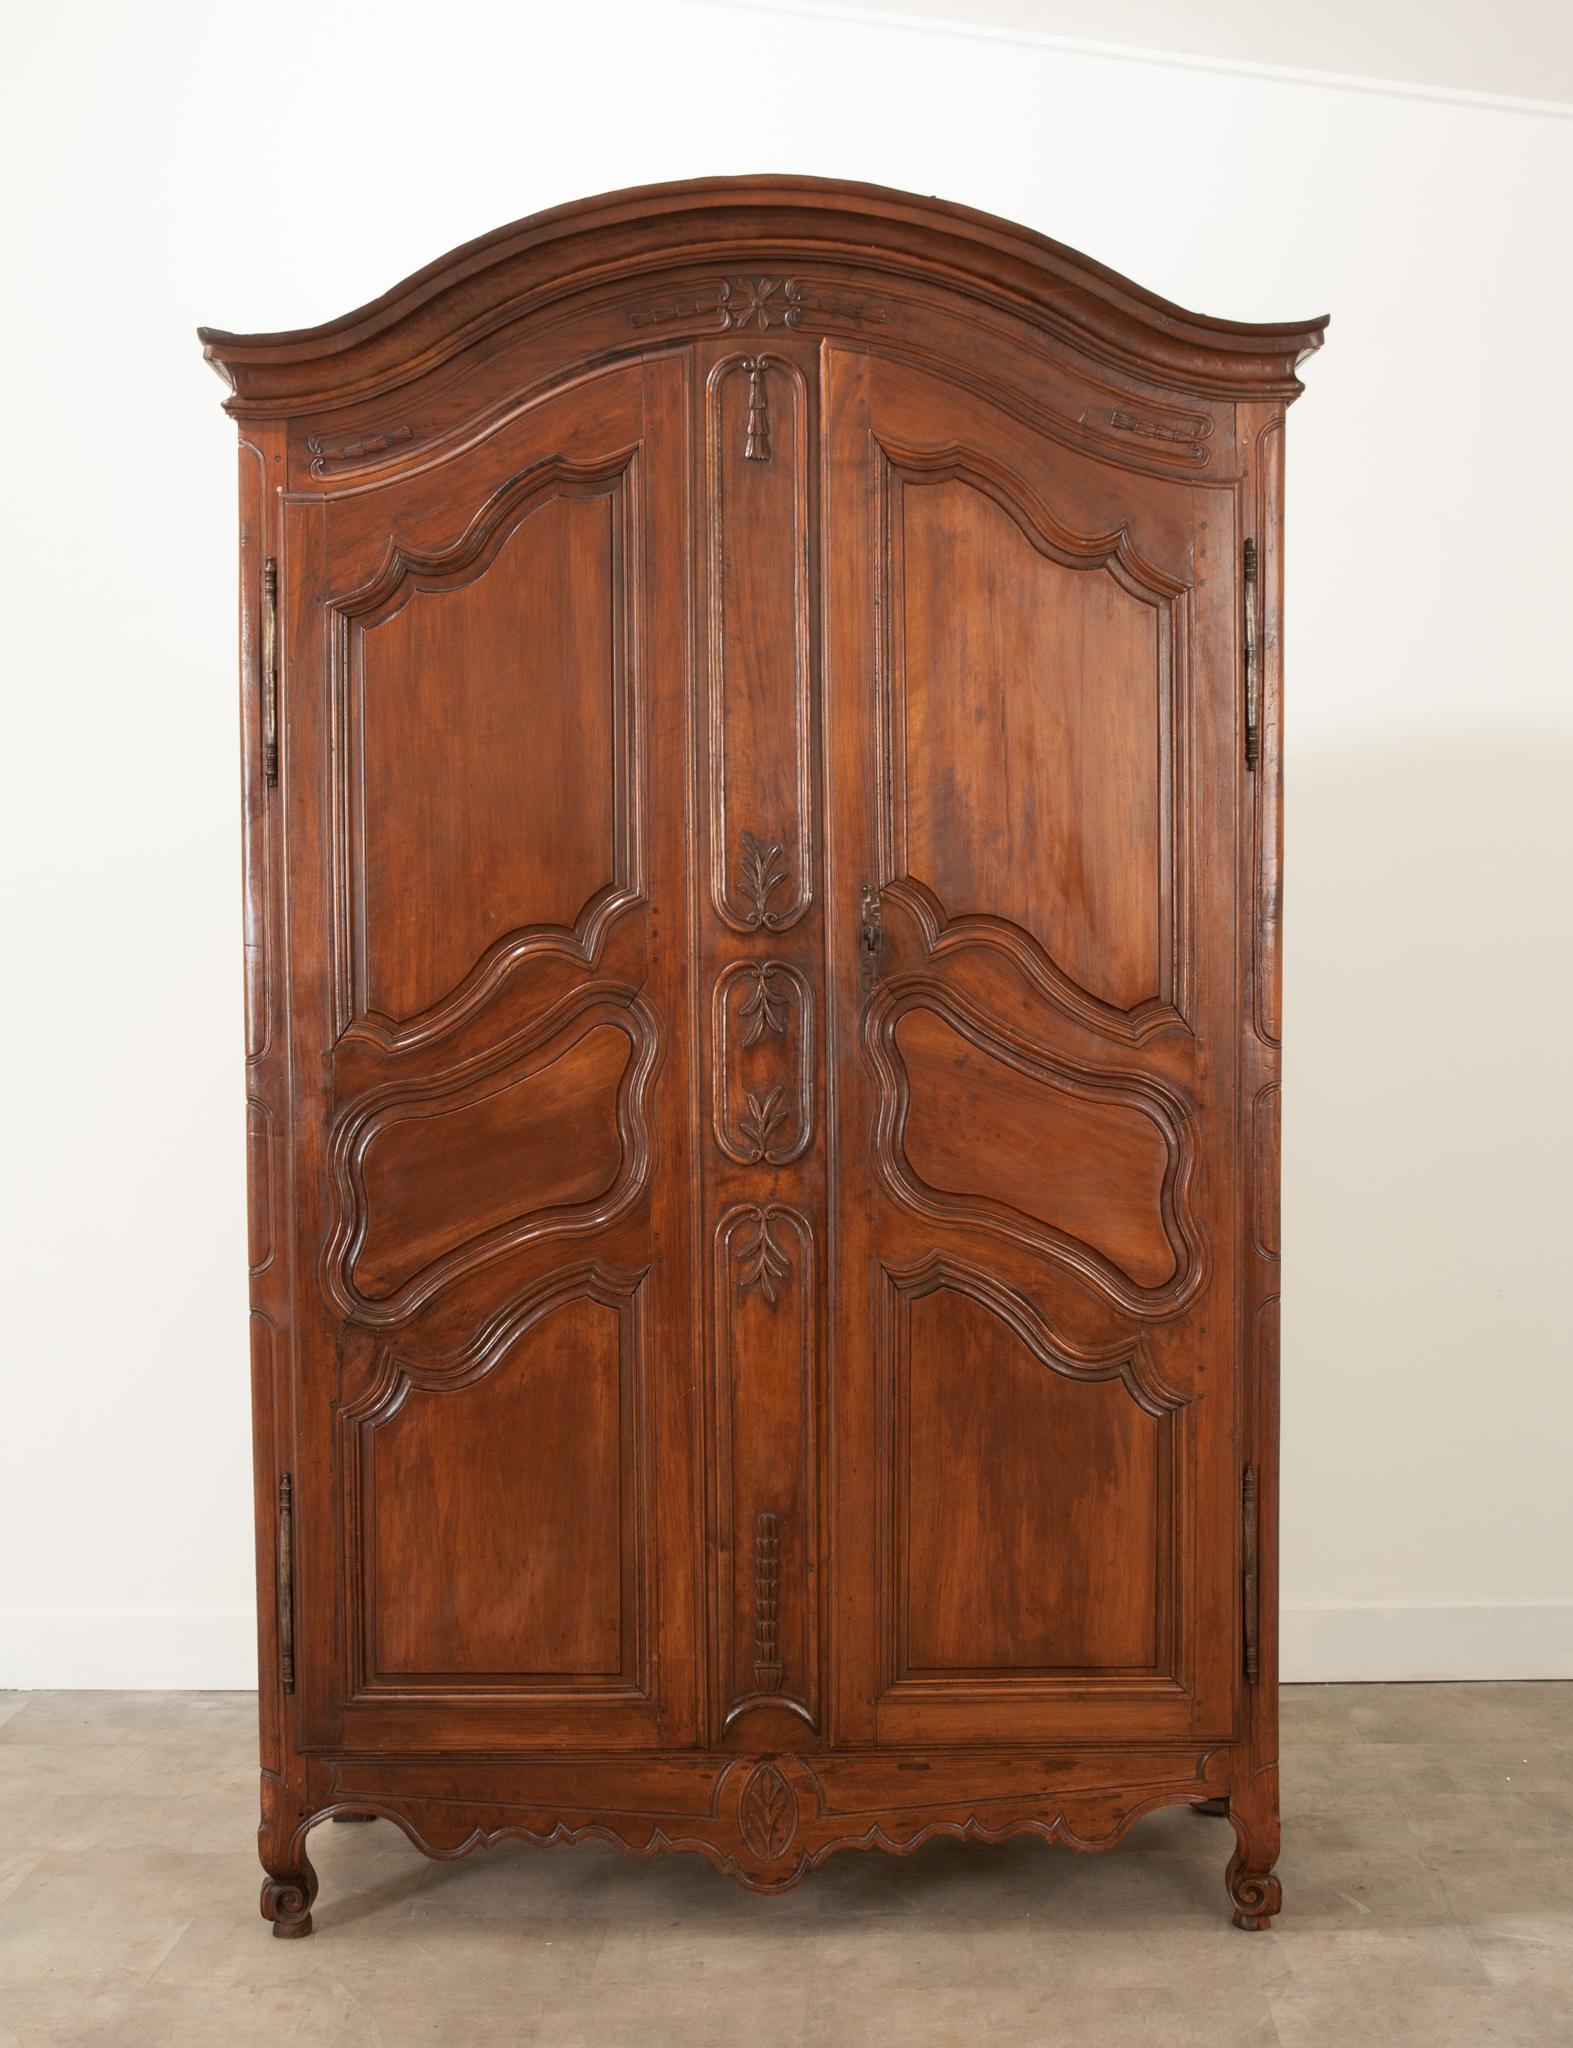 A wonderfully provincial Louis XV style armoire, handcrafted from solid walnut during the 19th century. A Chapeau de Gendarme cornice tops two doors with shapely carved panels creating a gorgeous façade with style-matching, recessed panels. They are